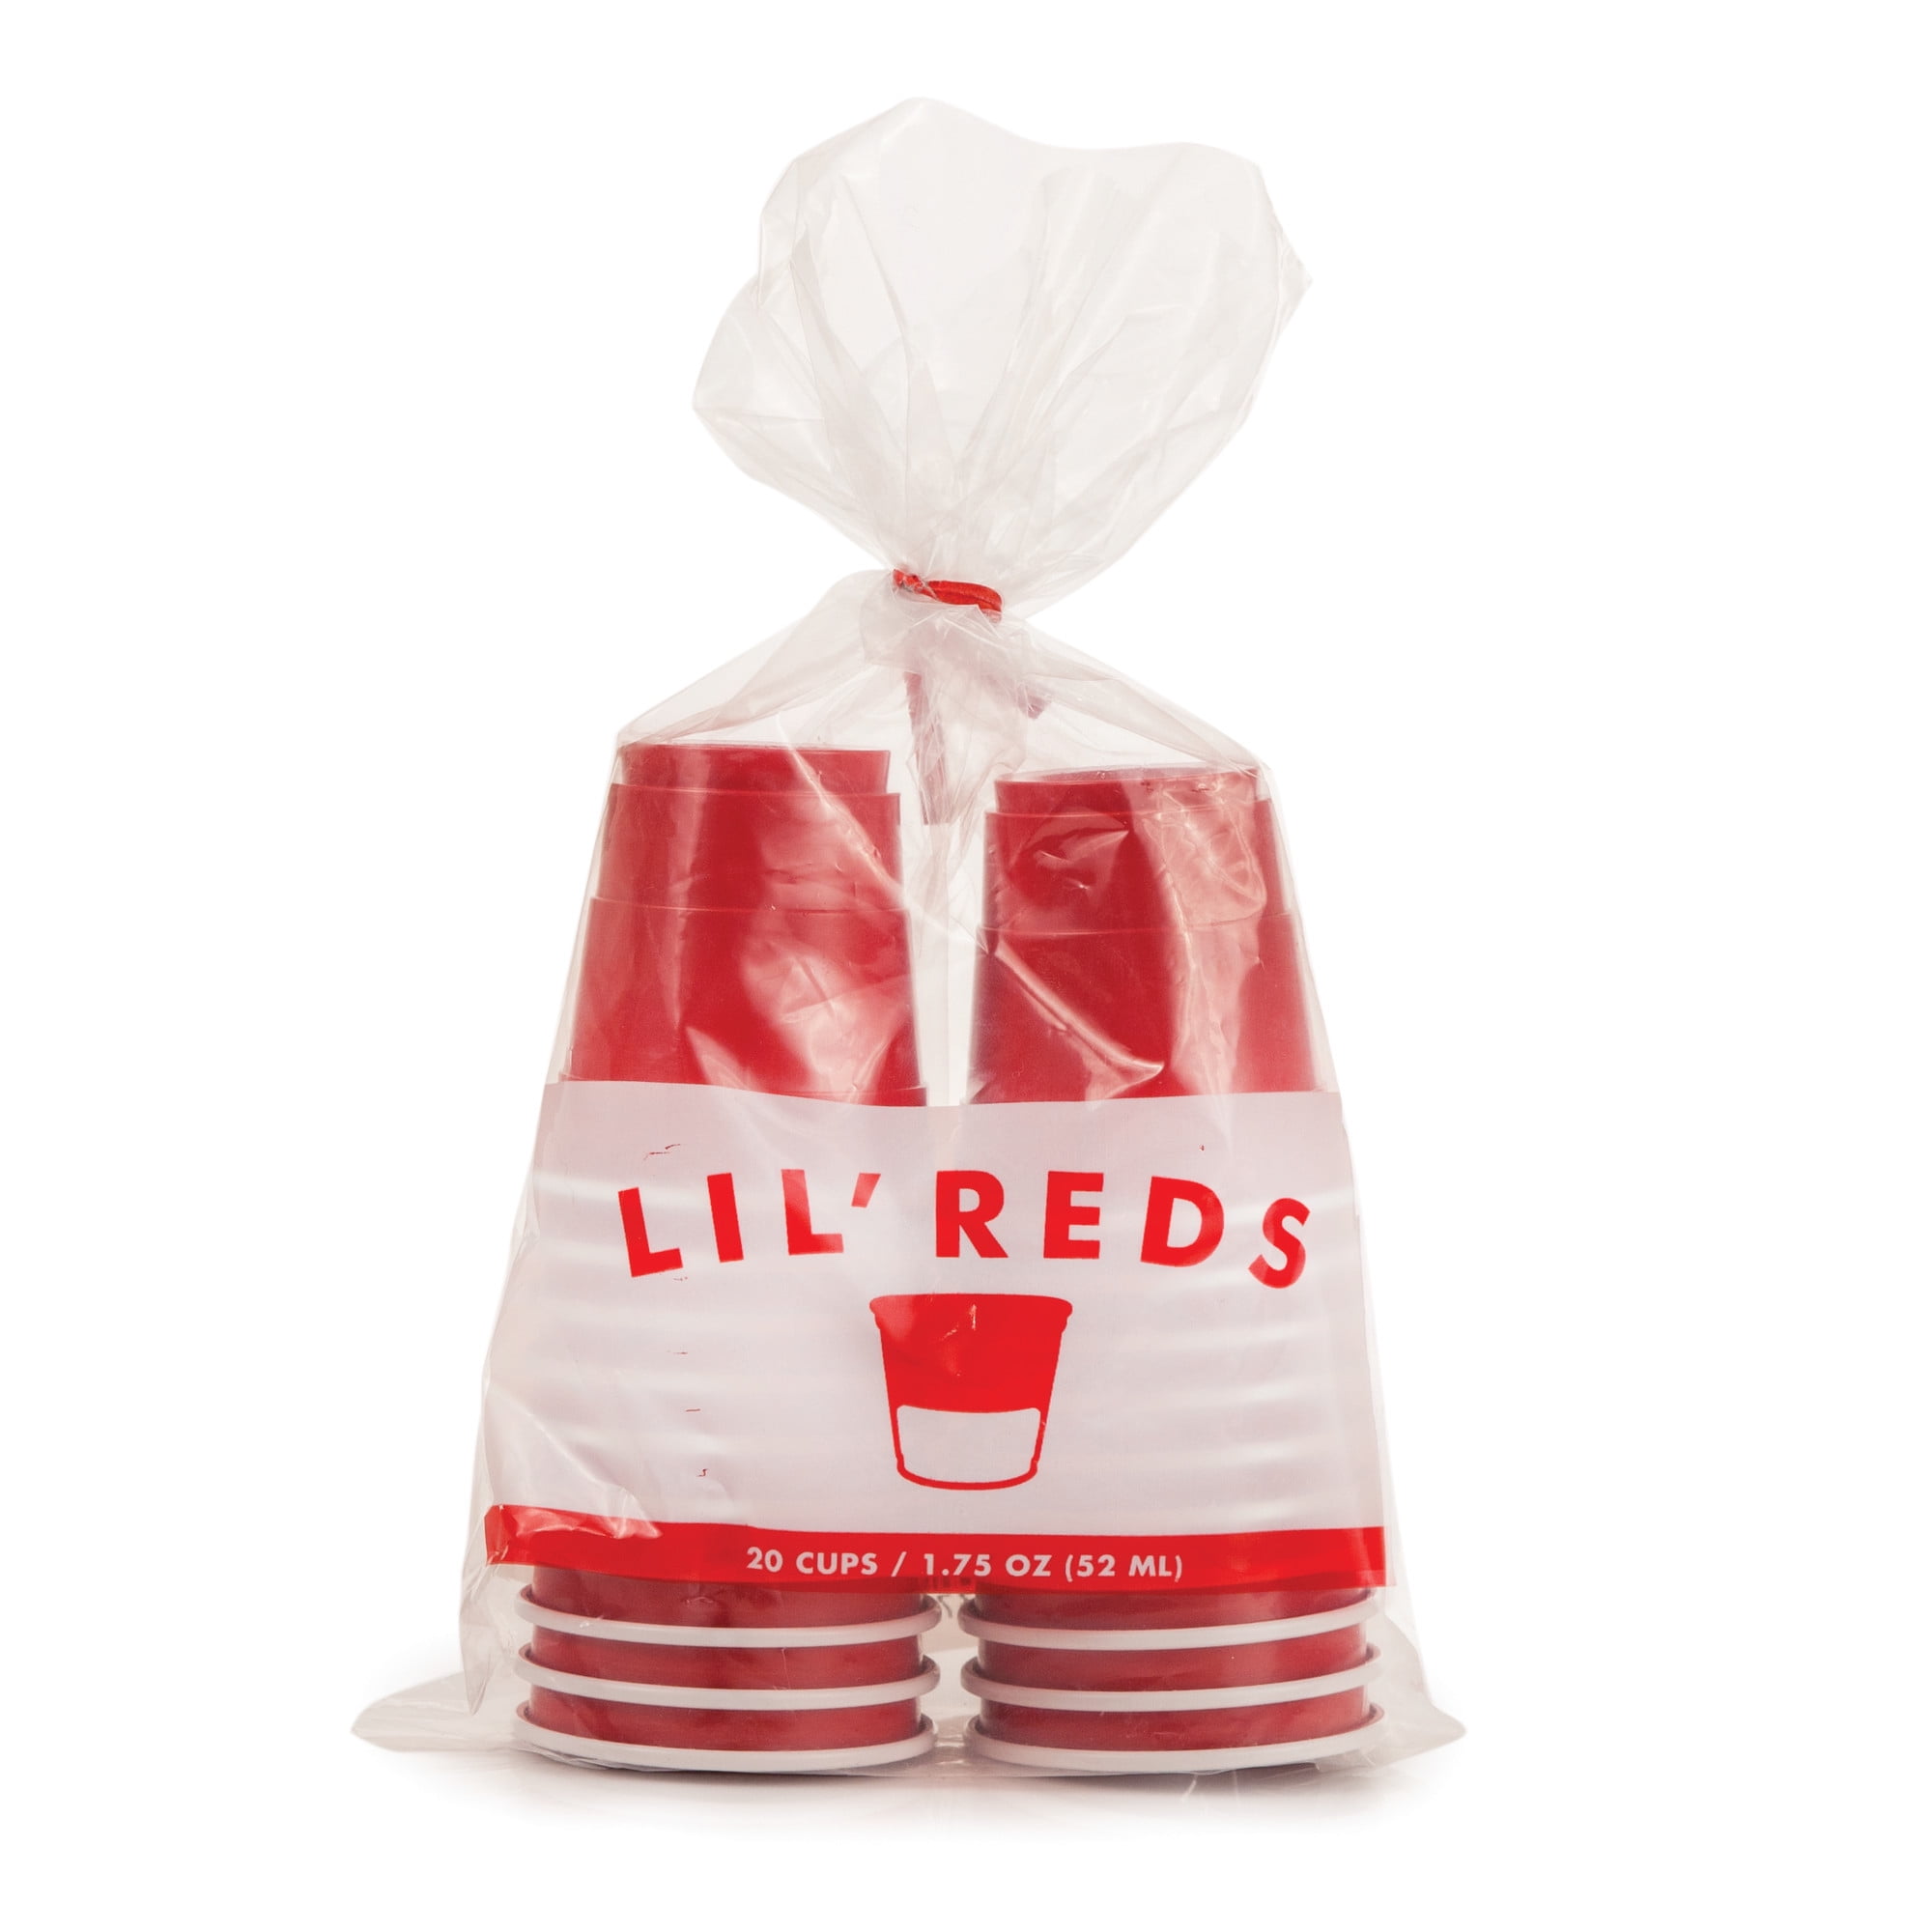 Lil' Reds Mini Plastic Cups Price & Reviews